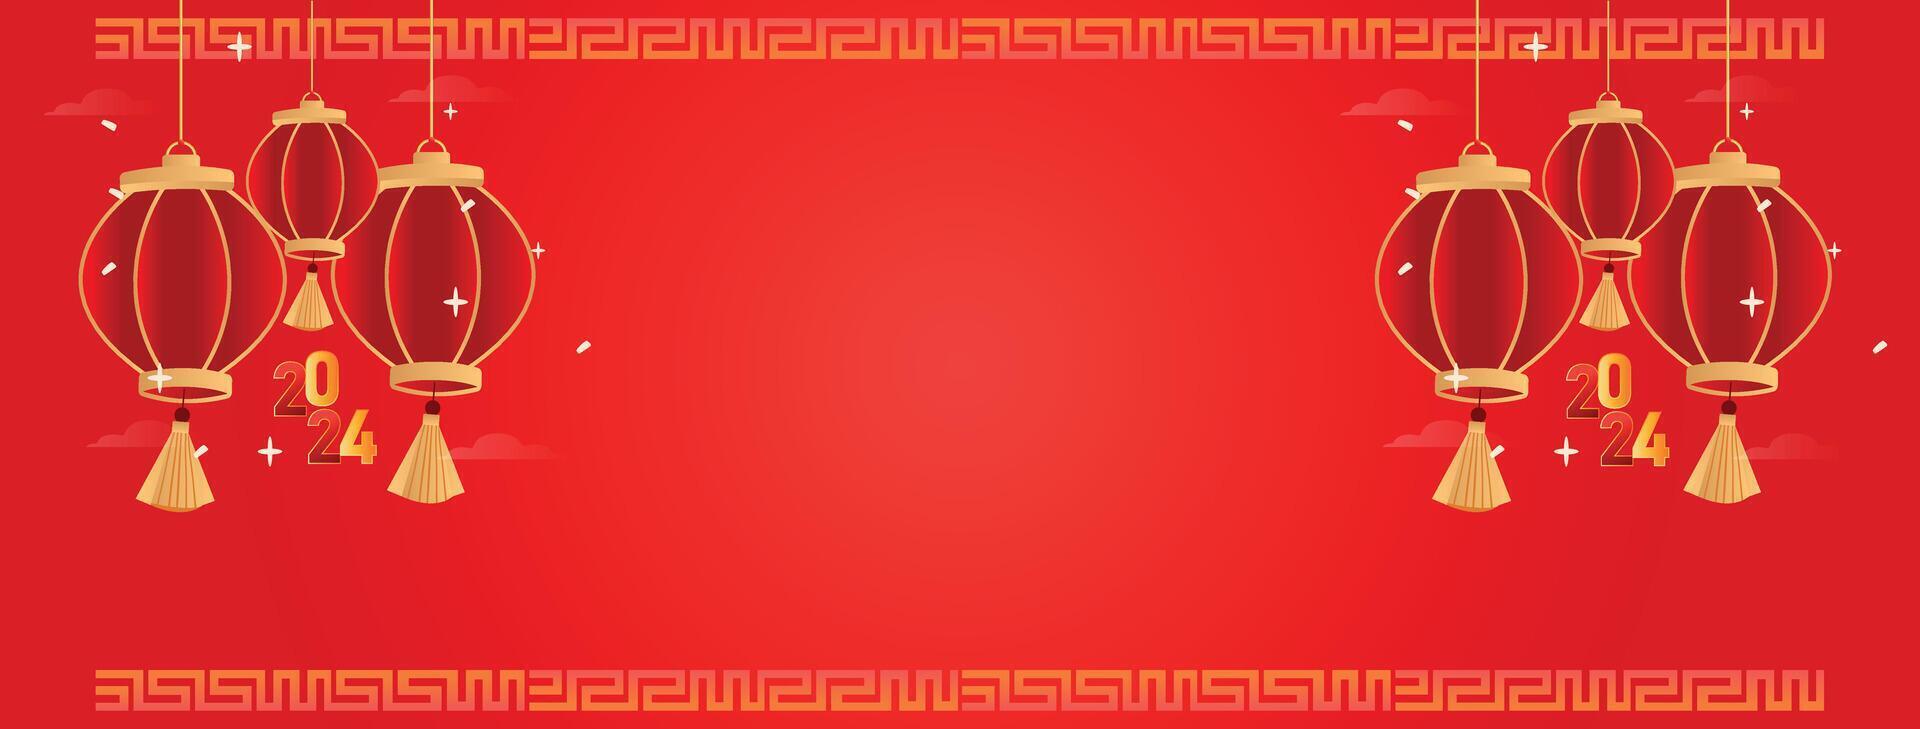 Chinese new year celebration cover banner. Chinese new year red pocket design. Red envelope design template. Happy Chinese new year social media banner in bright red colour. Chinese hanging lanterns vector